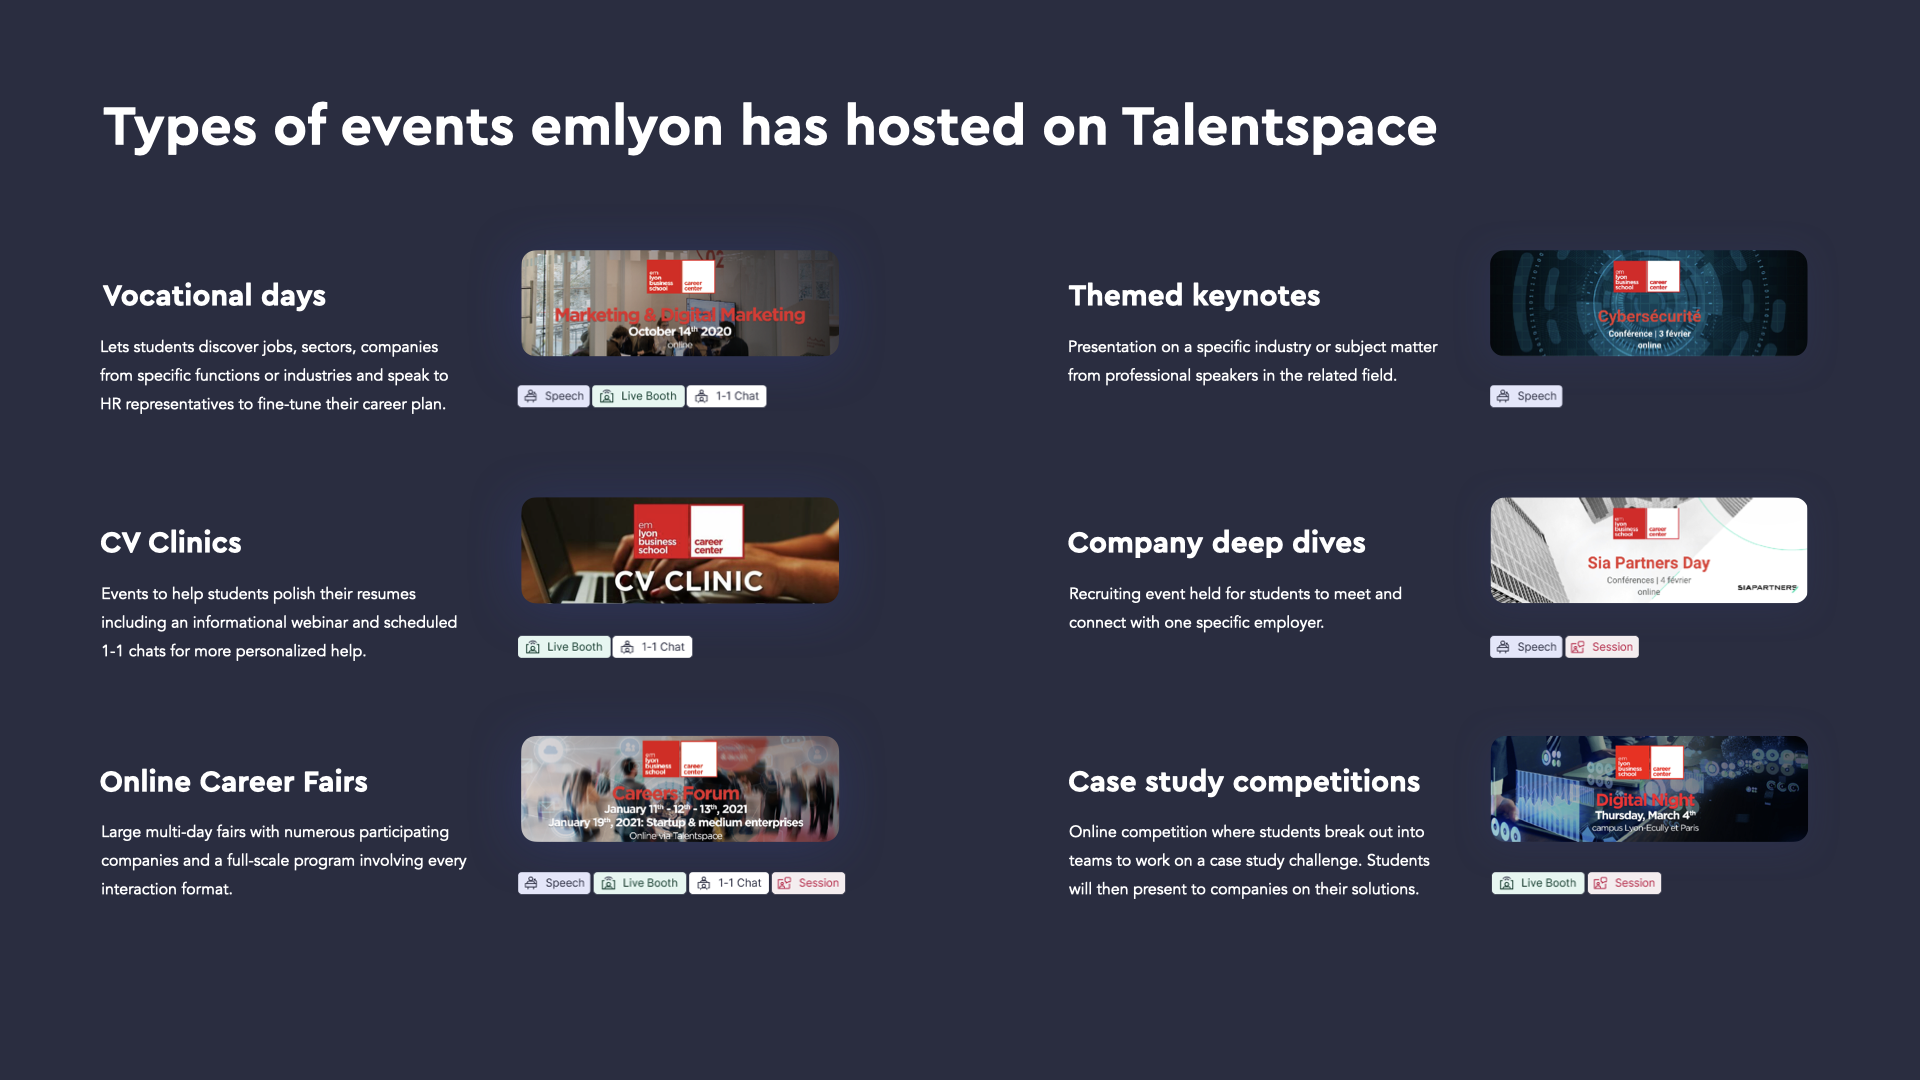 emlyon’s experience with the Talentspace platform